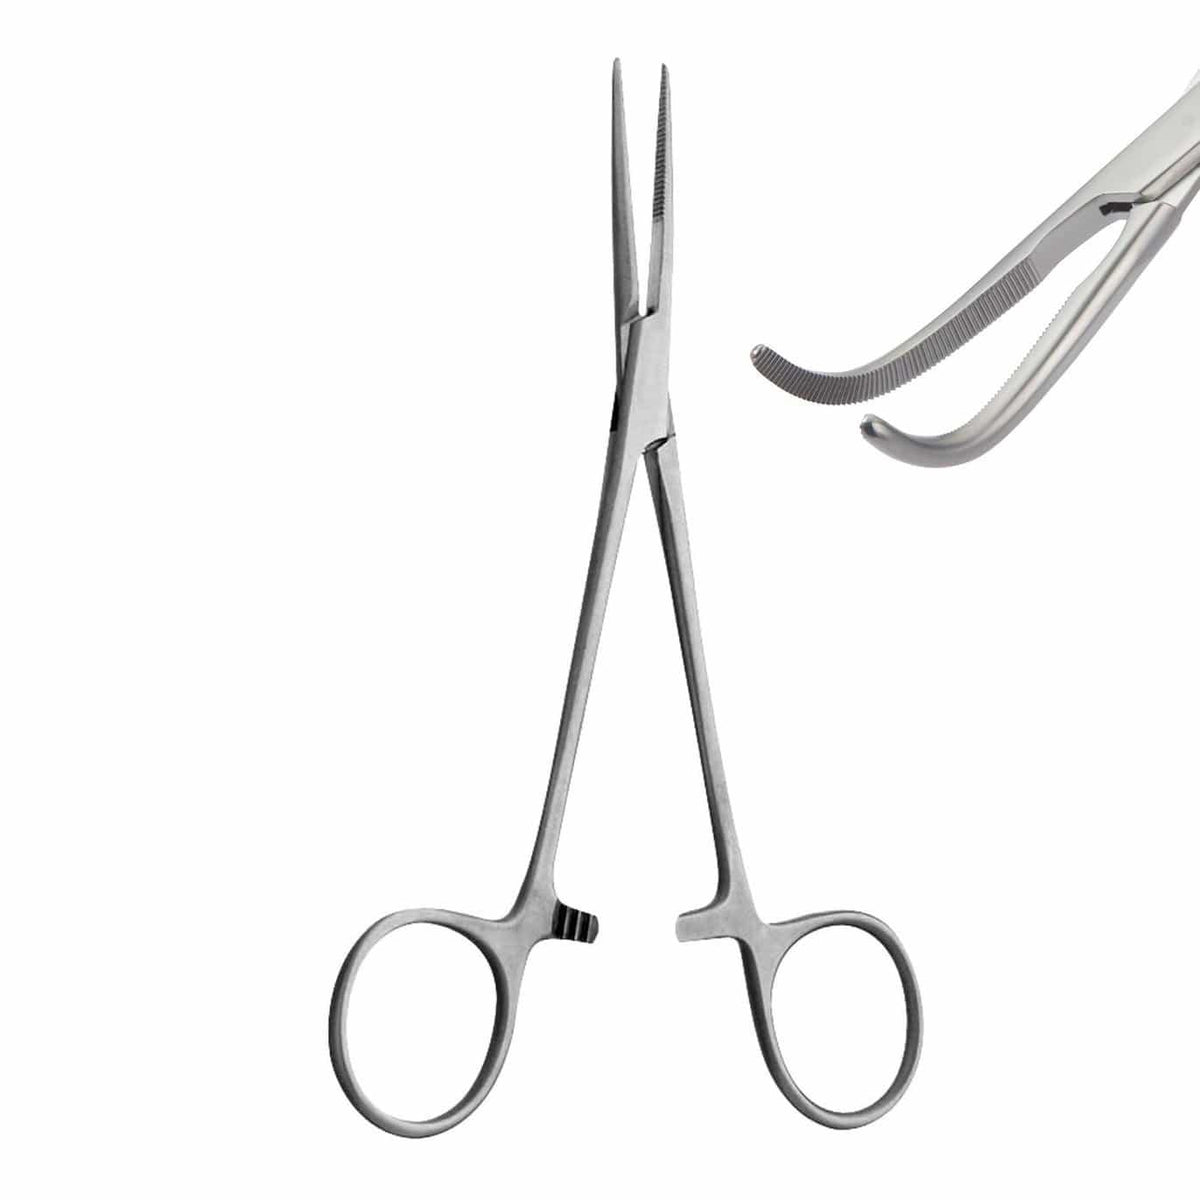 Armo Surgical Instruments Armo Kelly Artery Forceps